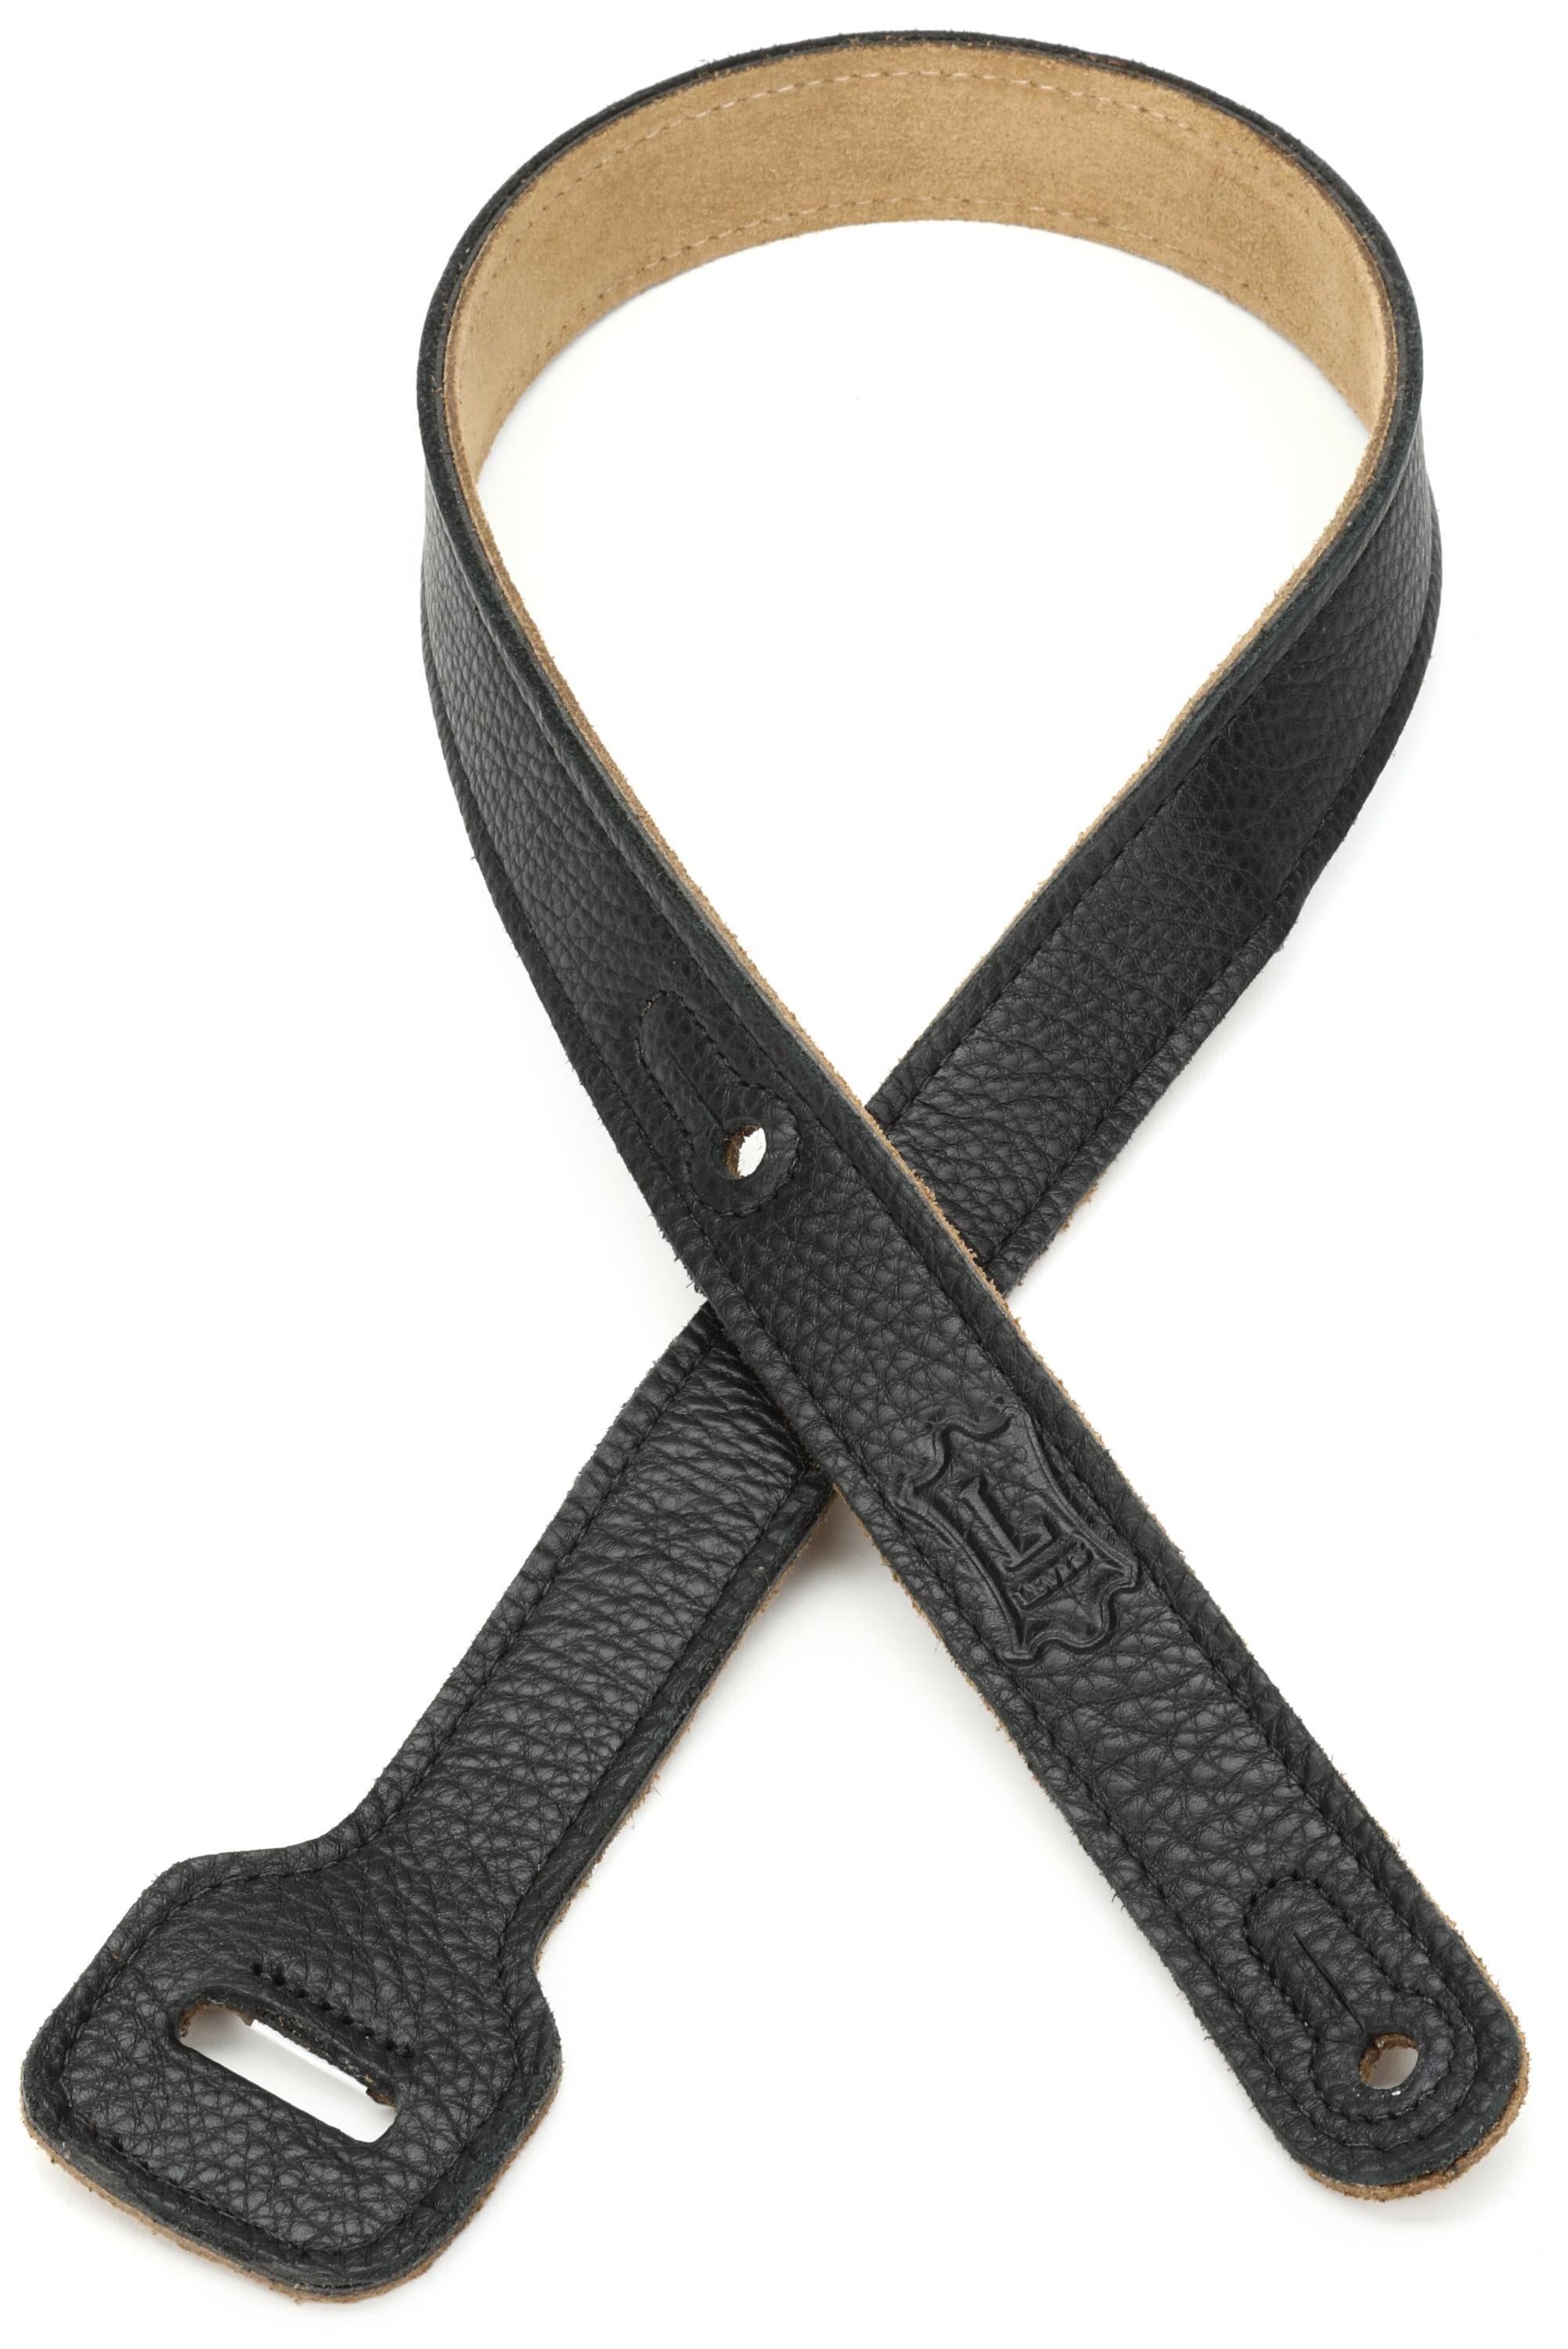 Levy's MMGSXL-2.5 Leather Strap Extension - Black | Sweetwater